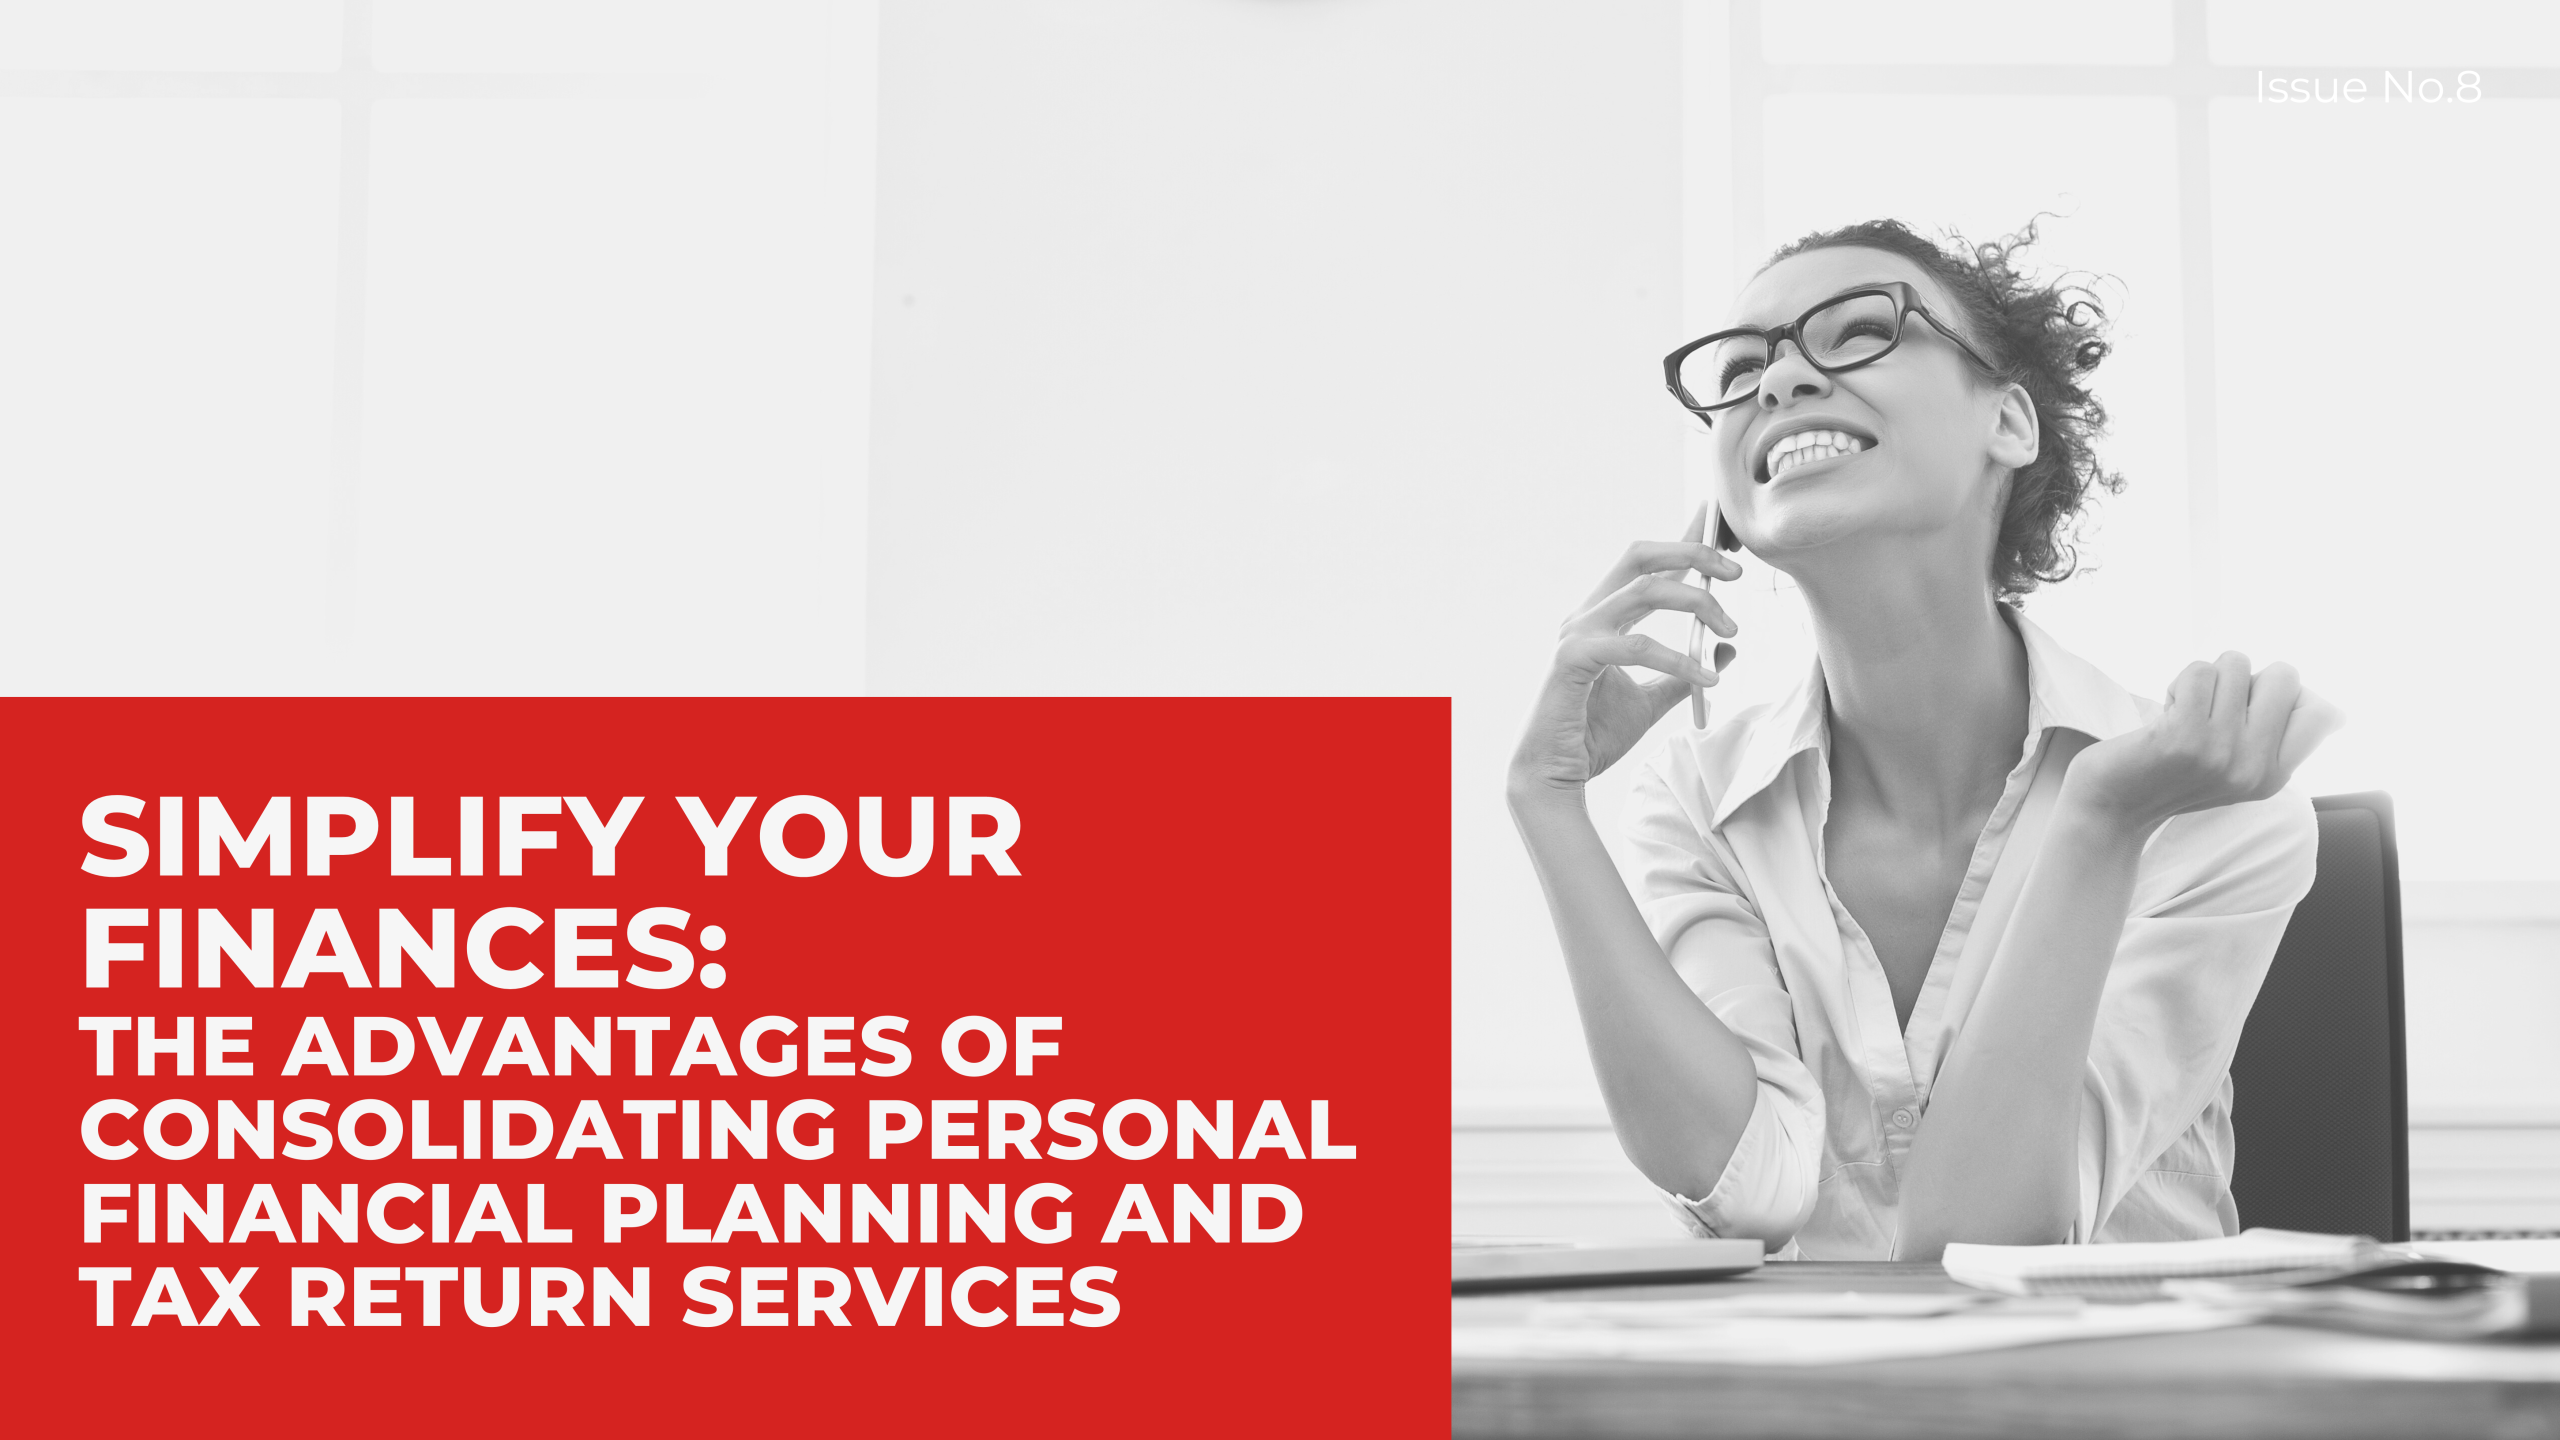 You are currently viewing THE ADVANTAGES OF CONSOLIDATING PERSONAL FINANCIAL PLANNING AND TAX RETURN SERVICES